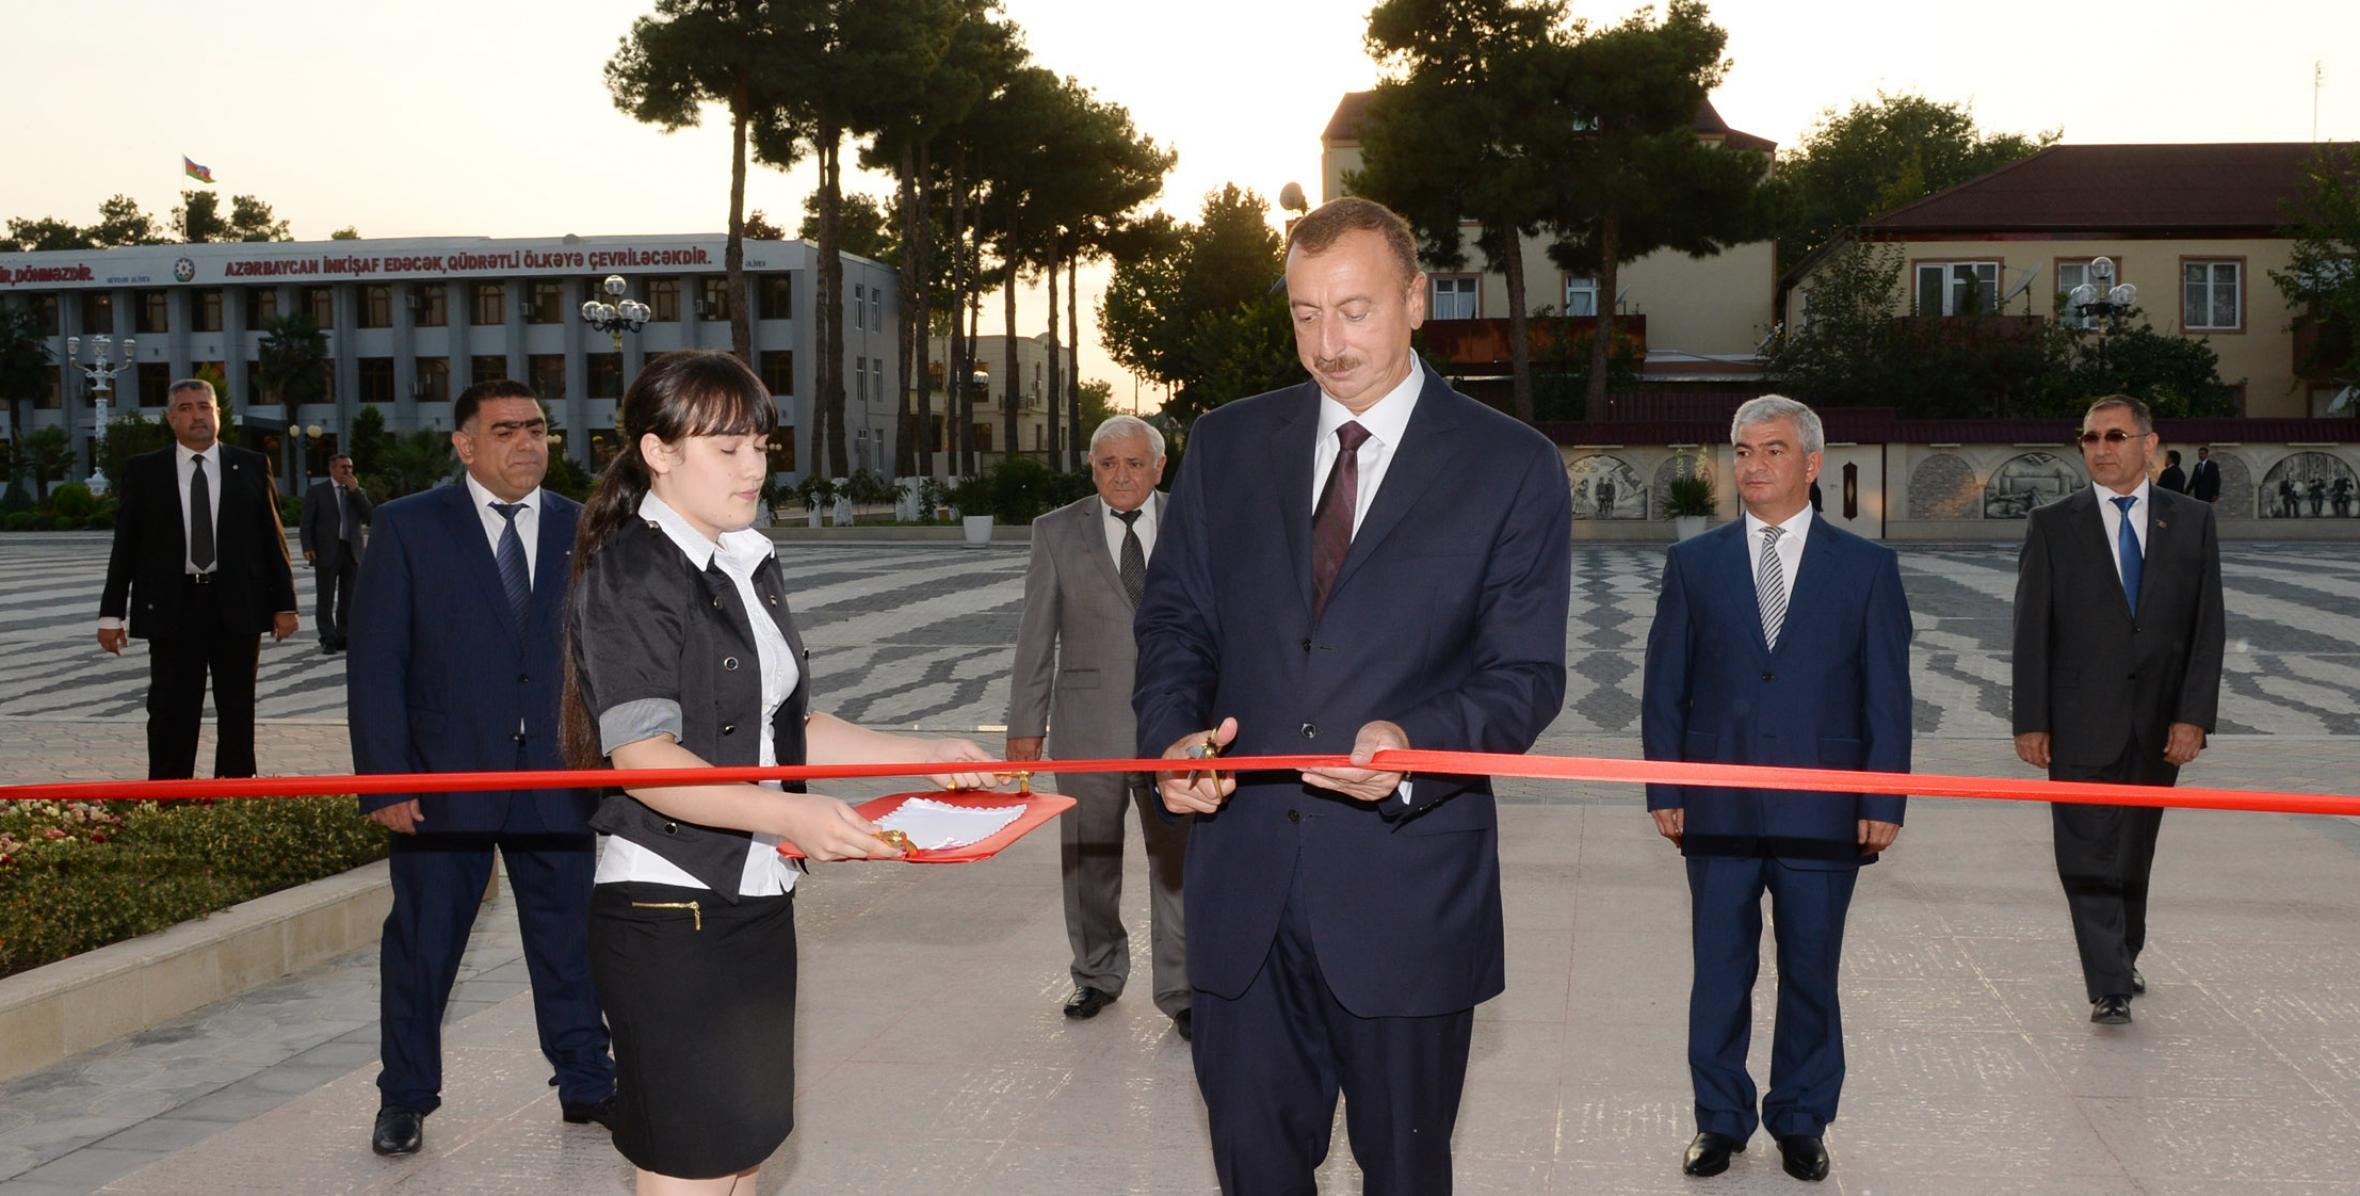 Ilham Aliyev attended the opening of a new office building of the Agjabadi District branch of the “Yeni Azerbaijan Party”